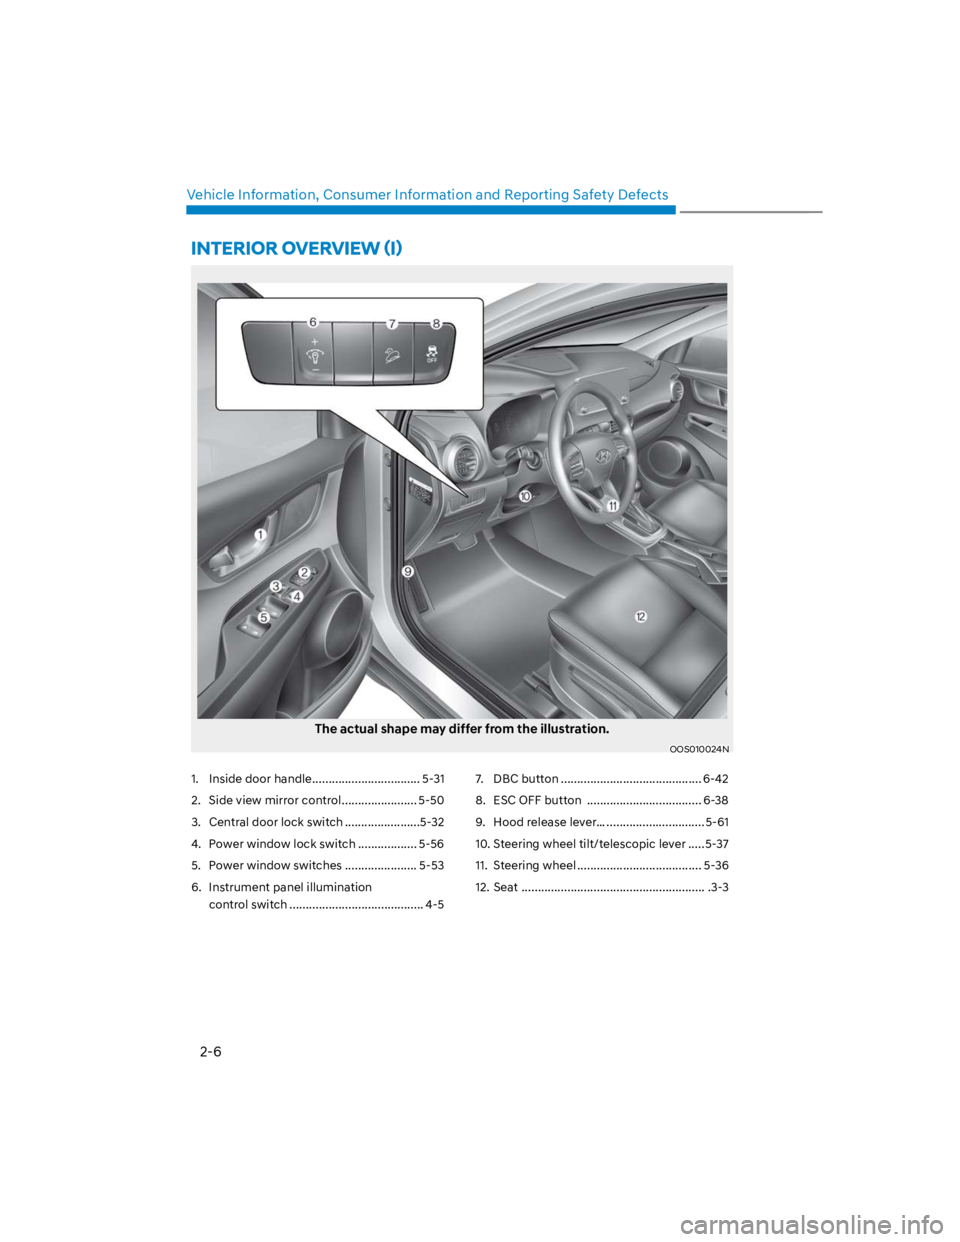 HYUNDAI KONA 2022  Owners Manual 2-6
Vehicle Information, Consumer Information and Reporting Safety Defects
The actual shape may differ from the illustration.
OOS010024N
1.  Inside door handle ................................. 5-31
2